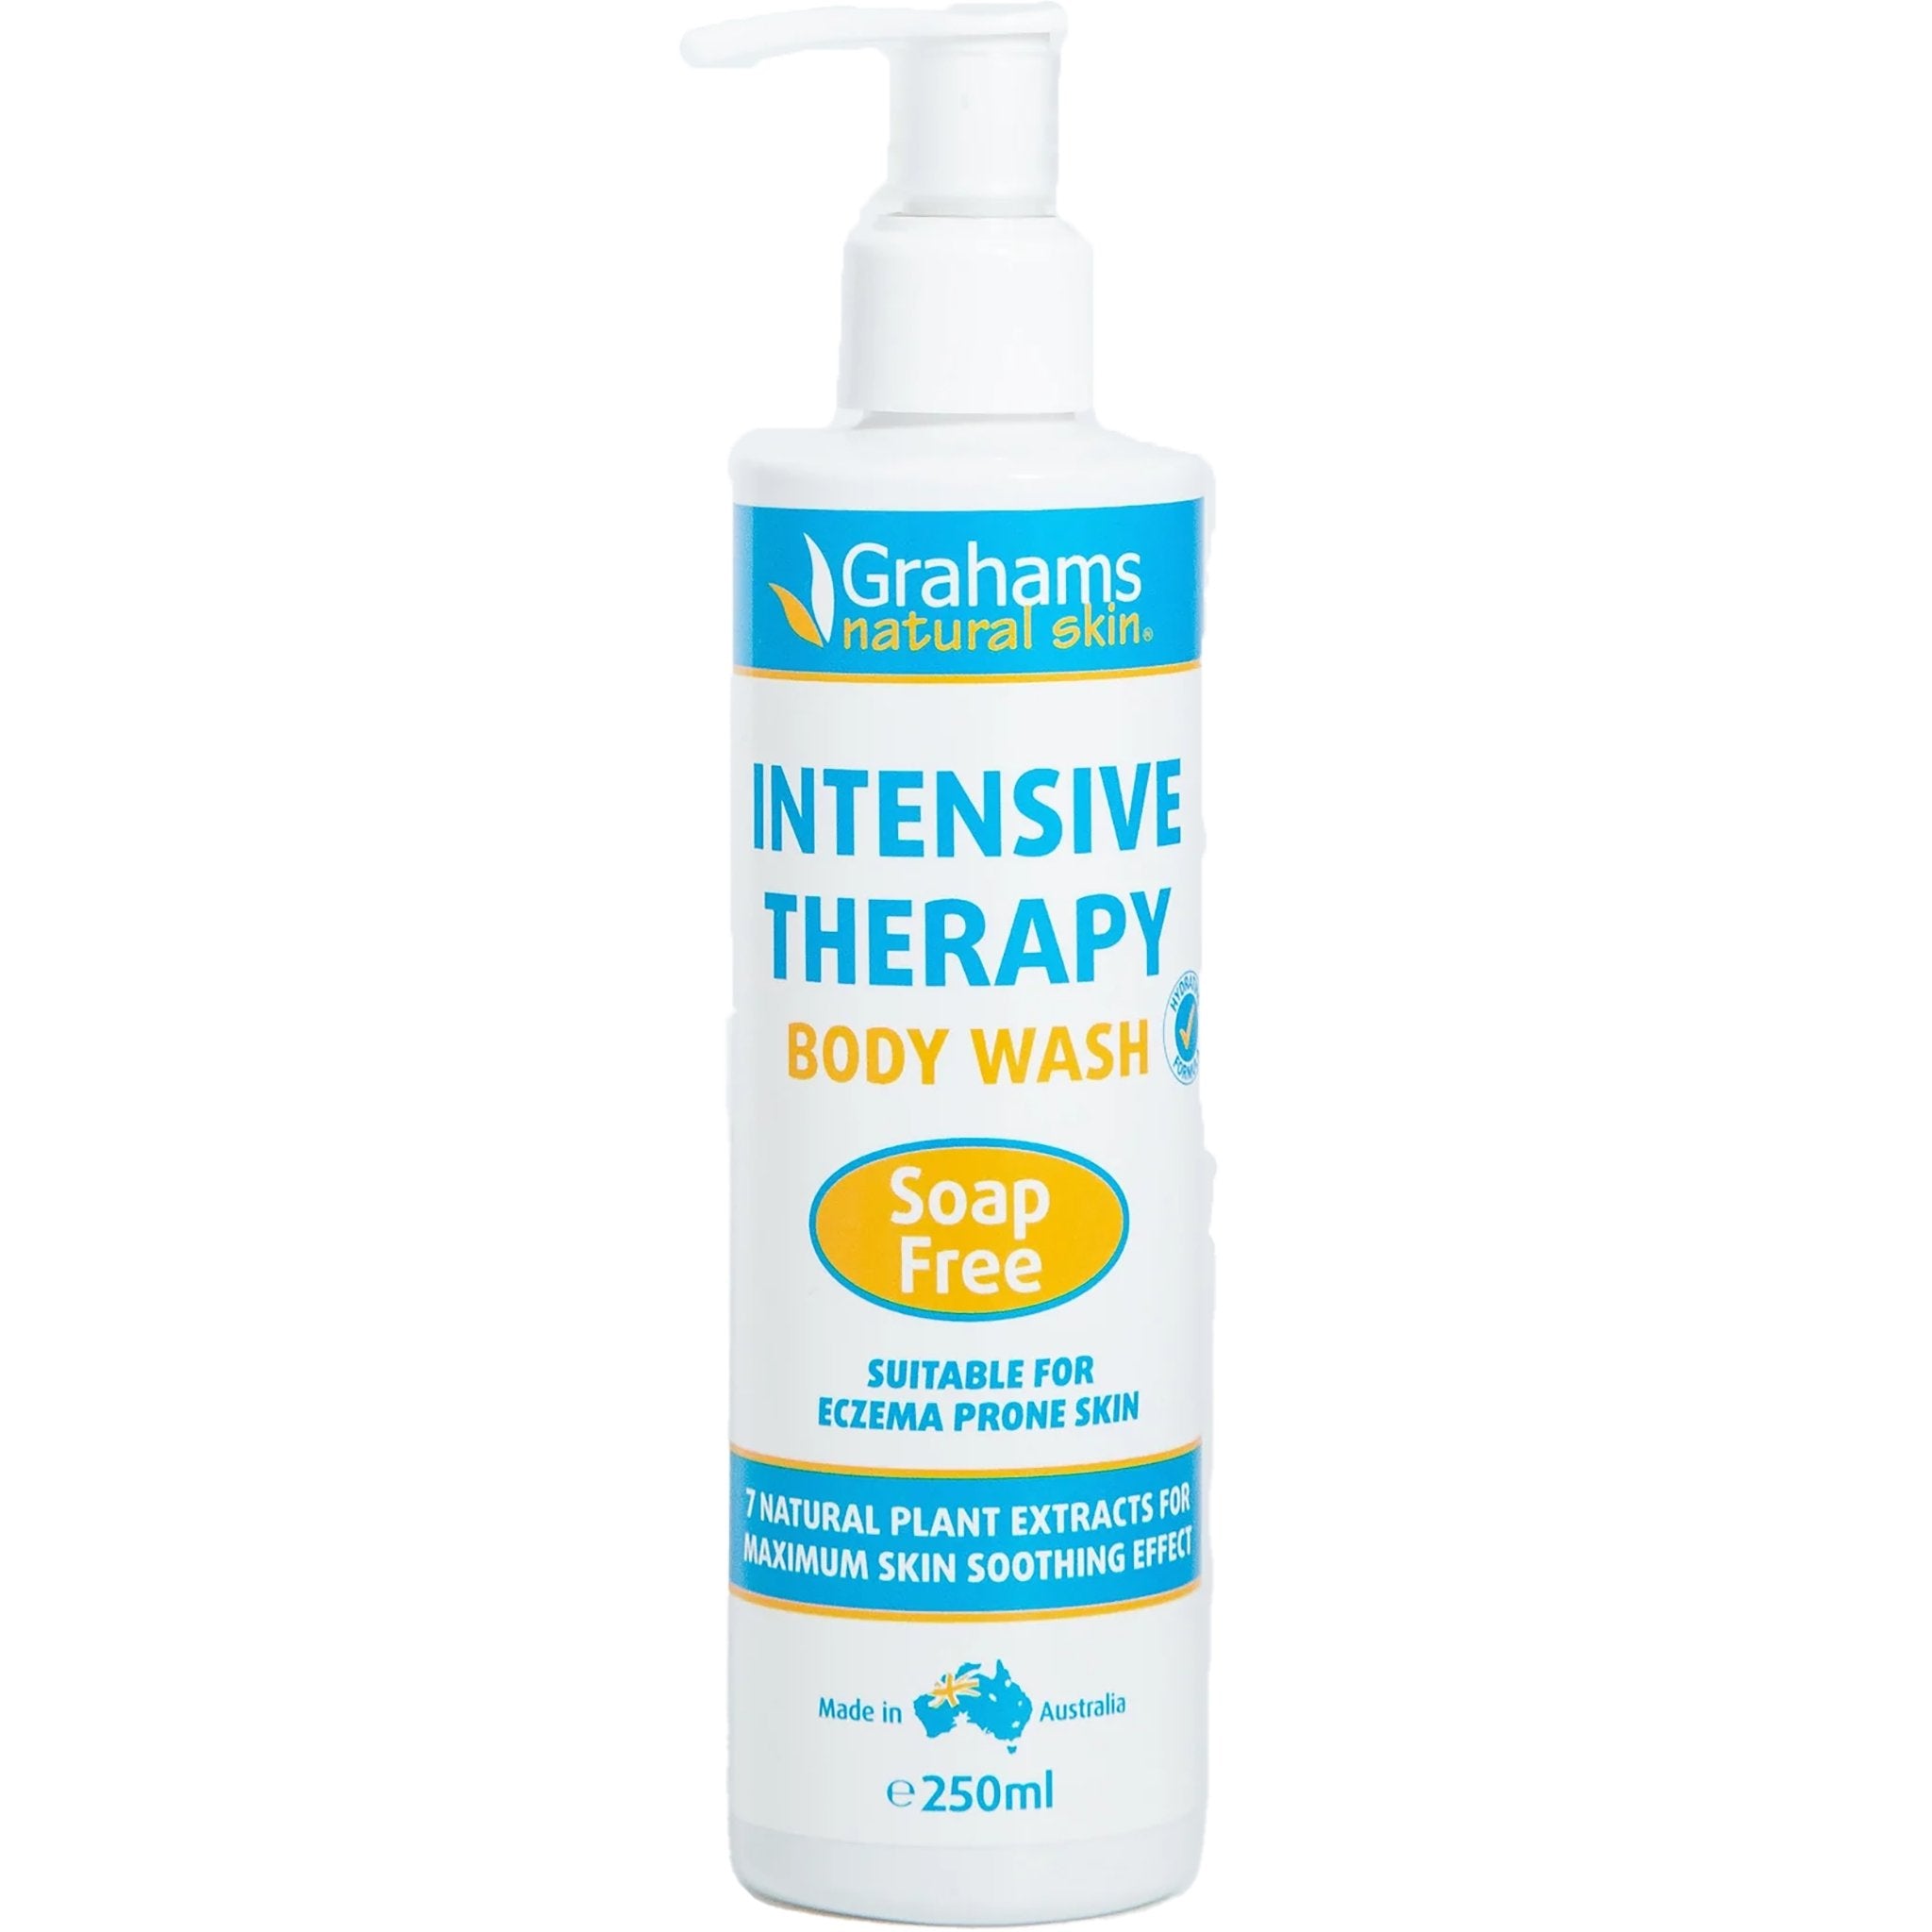 NEW Intensive Therapy Body Wash - mypure.co.uk